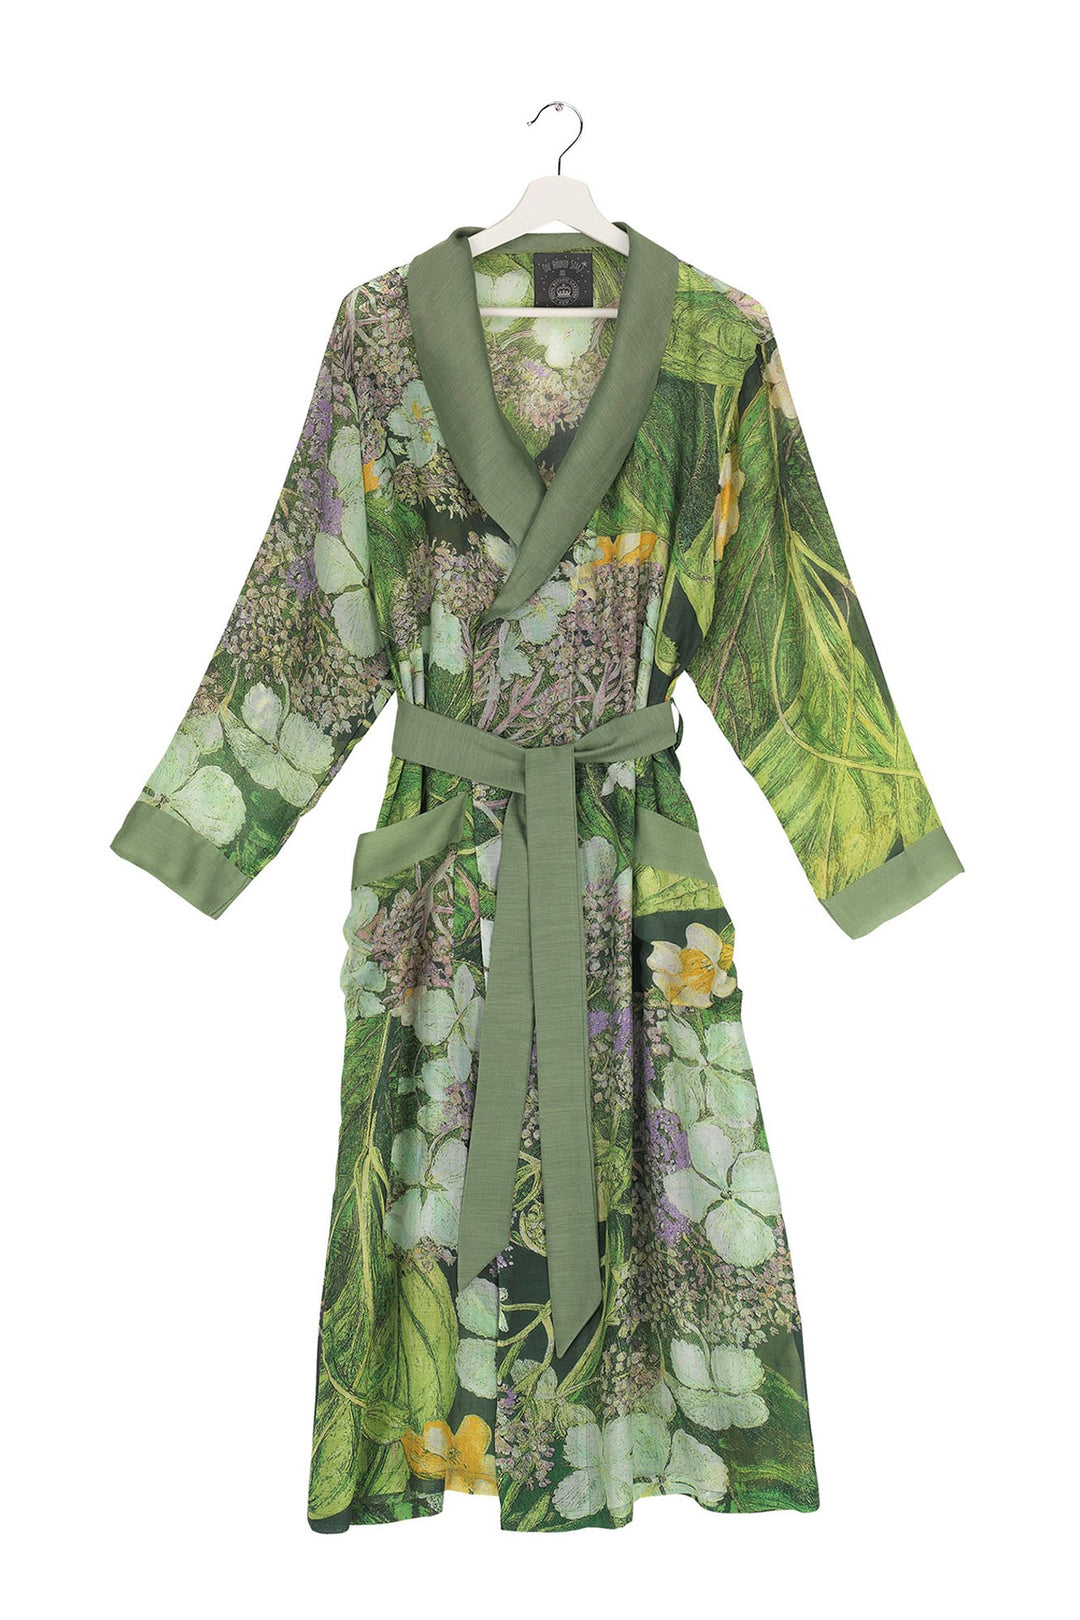 Marianne North Hydrangea Lime Green Gown-This gown is perfect as a luxurious house coat or for layering as a chic accessory to your favourite outfit. 